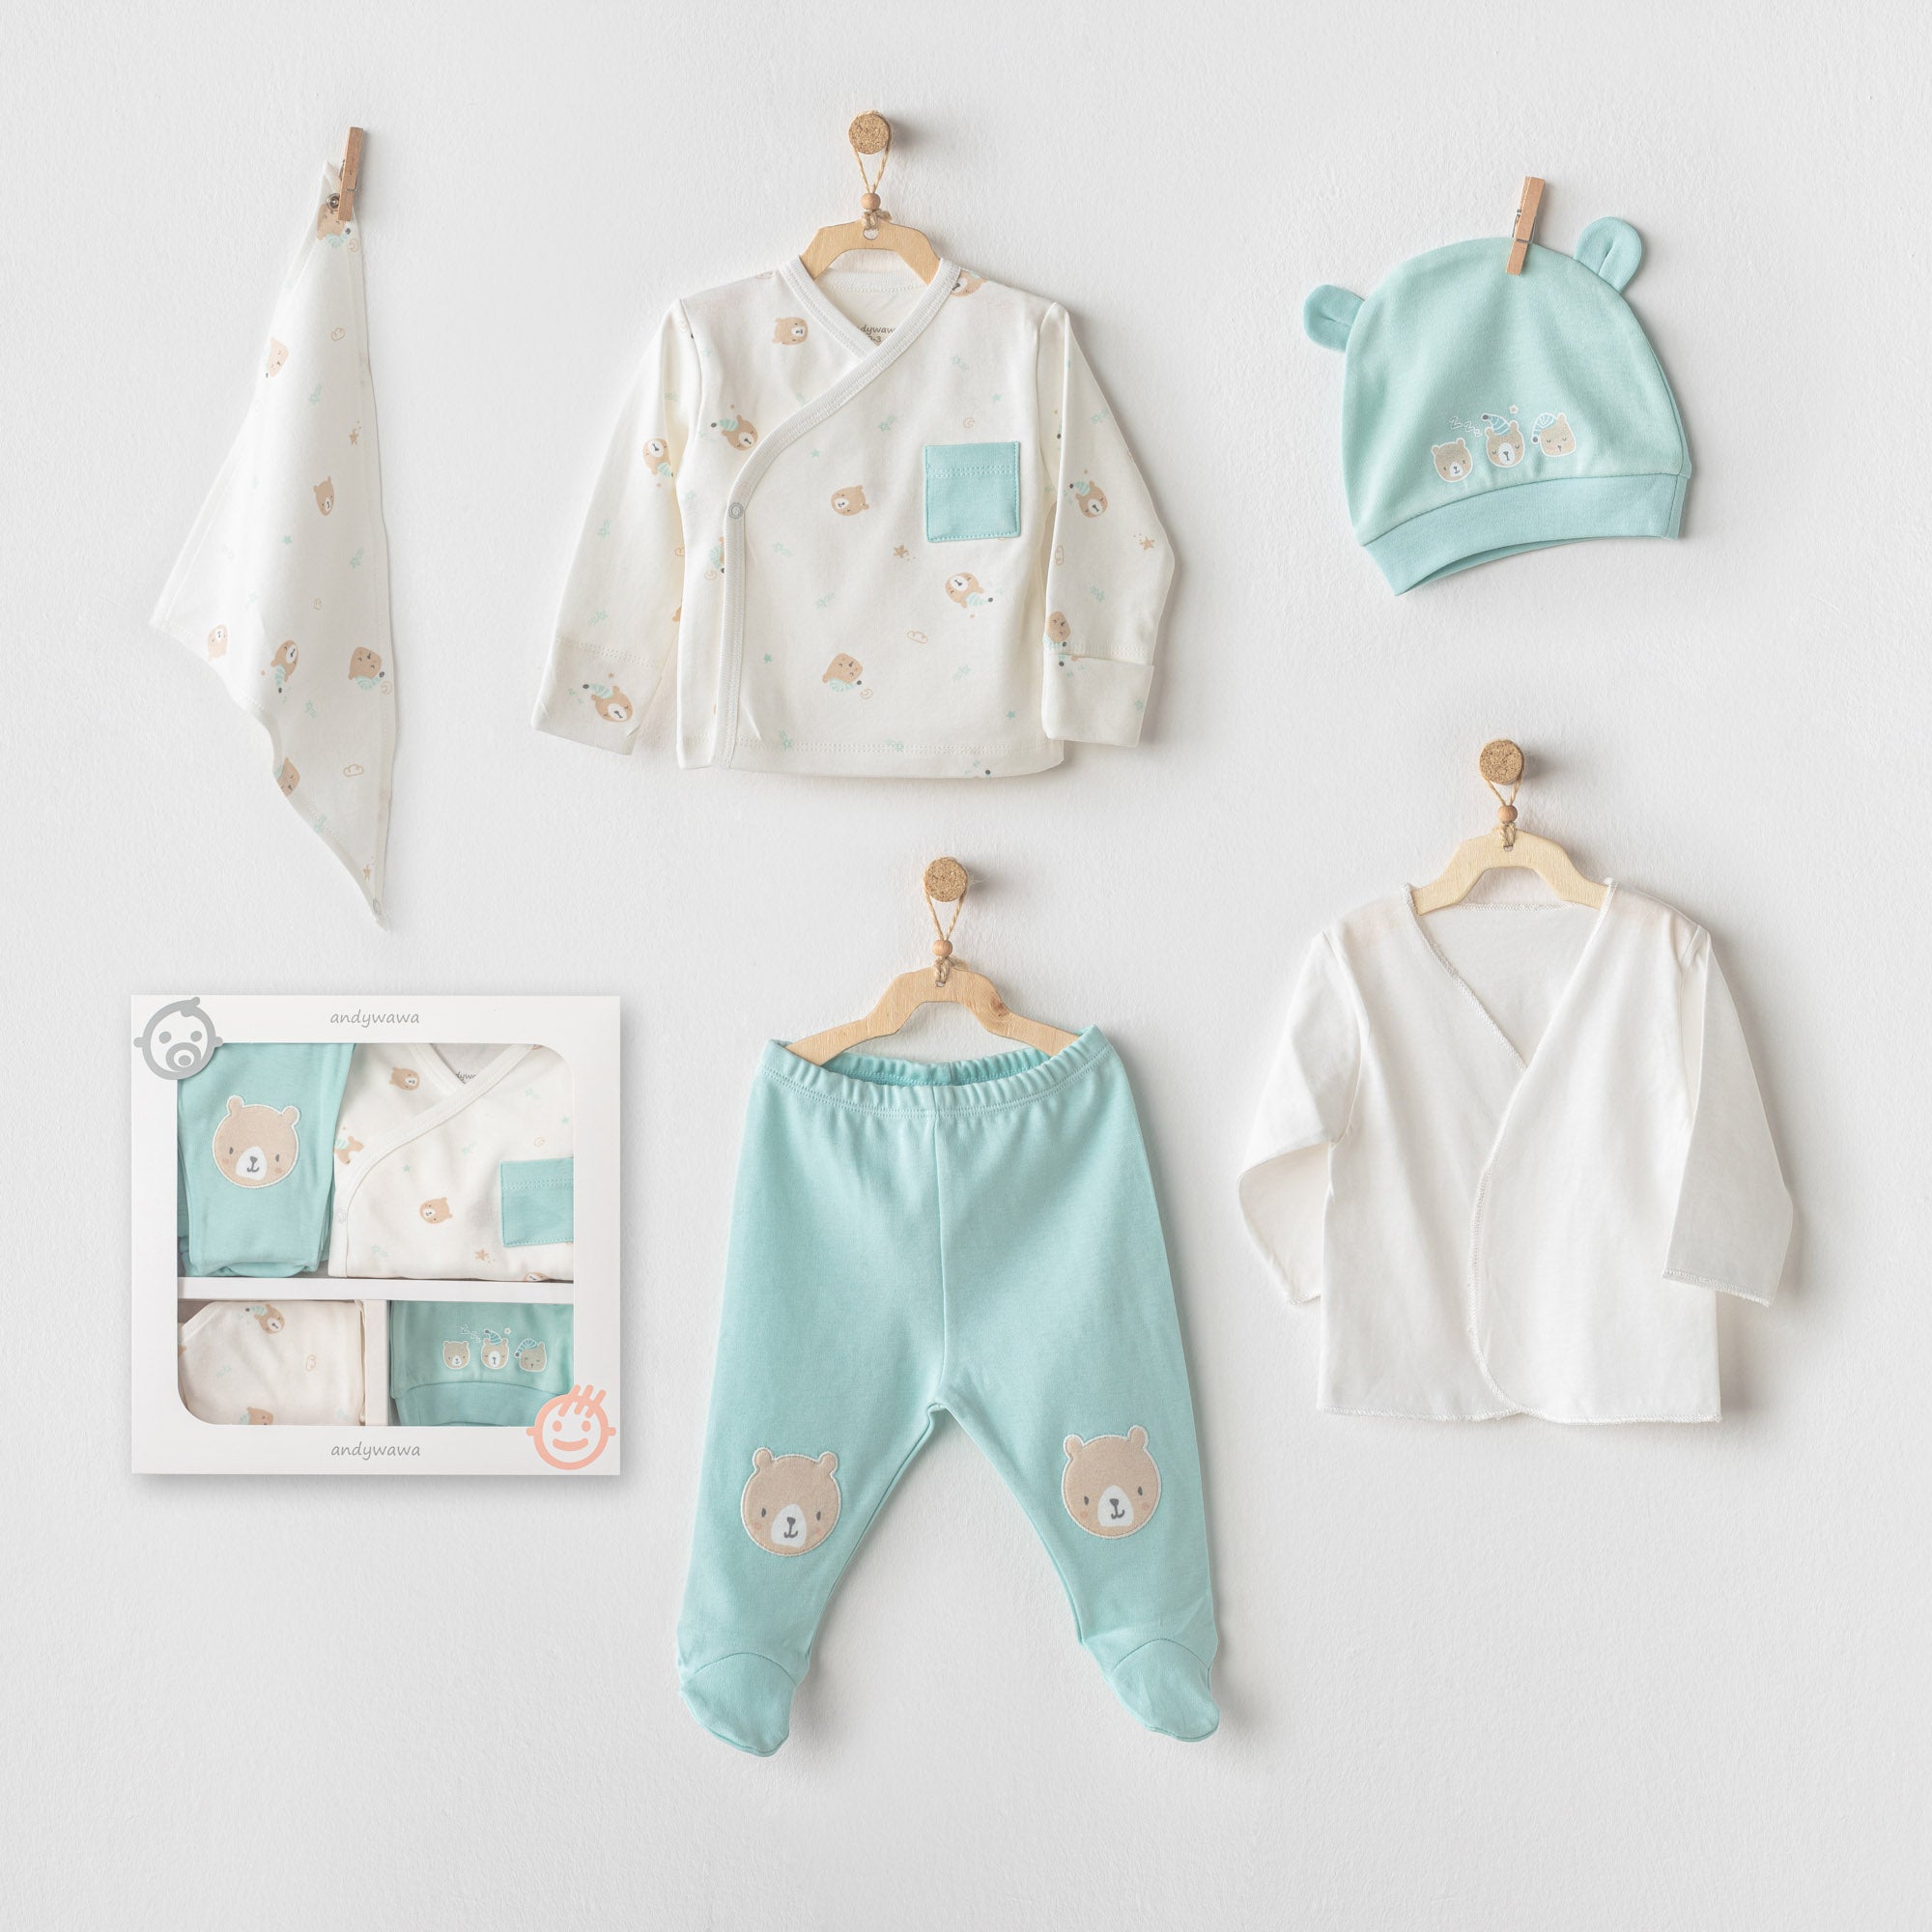 New born 5 pieces hospital set - New born 5 pieces hospital set - 0-3 Months - Andywawa - Melymod